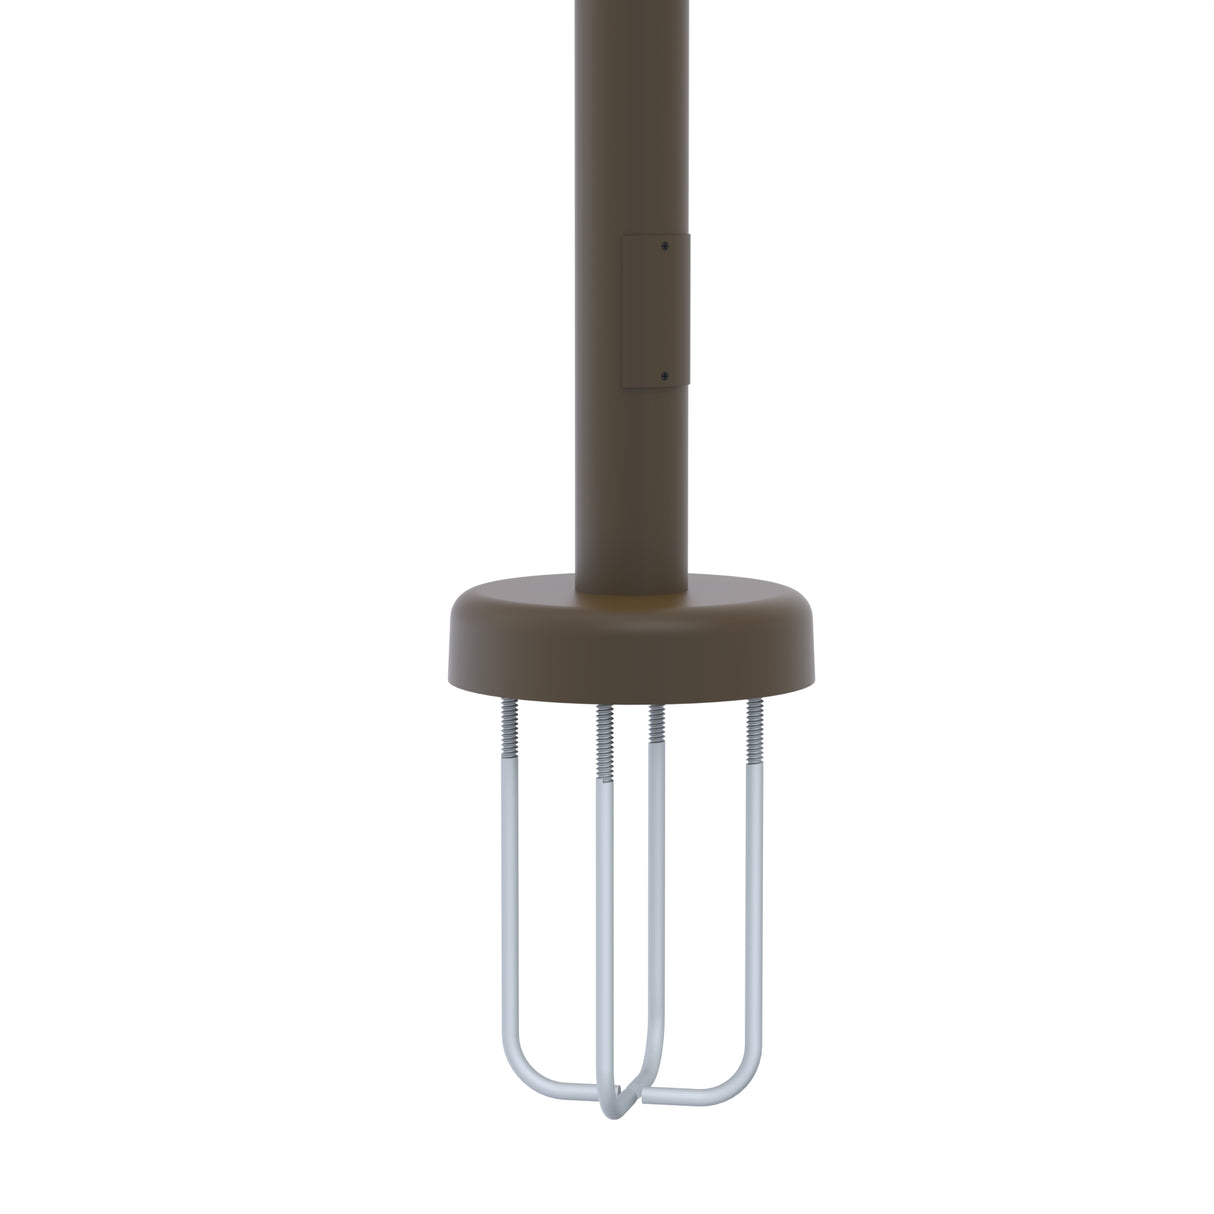 10' Tall x 5.0" Base OD x 3.0" Top OD x 0.125" Thick, Round Tapered Aluminum, Hinged Anchor Base Light Pole